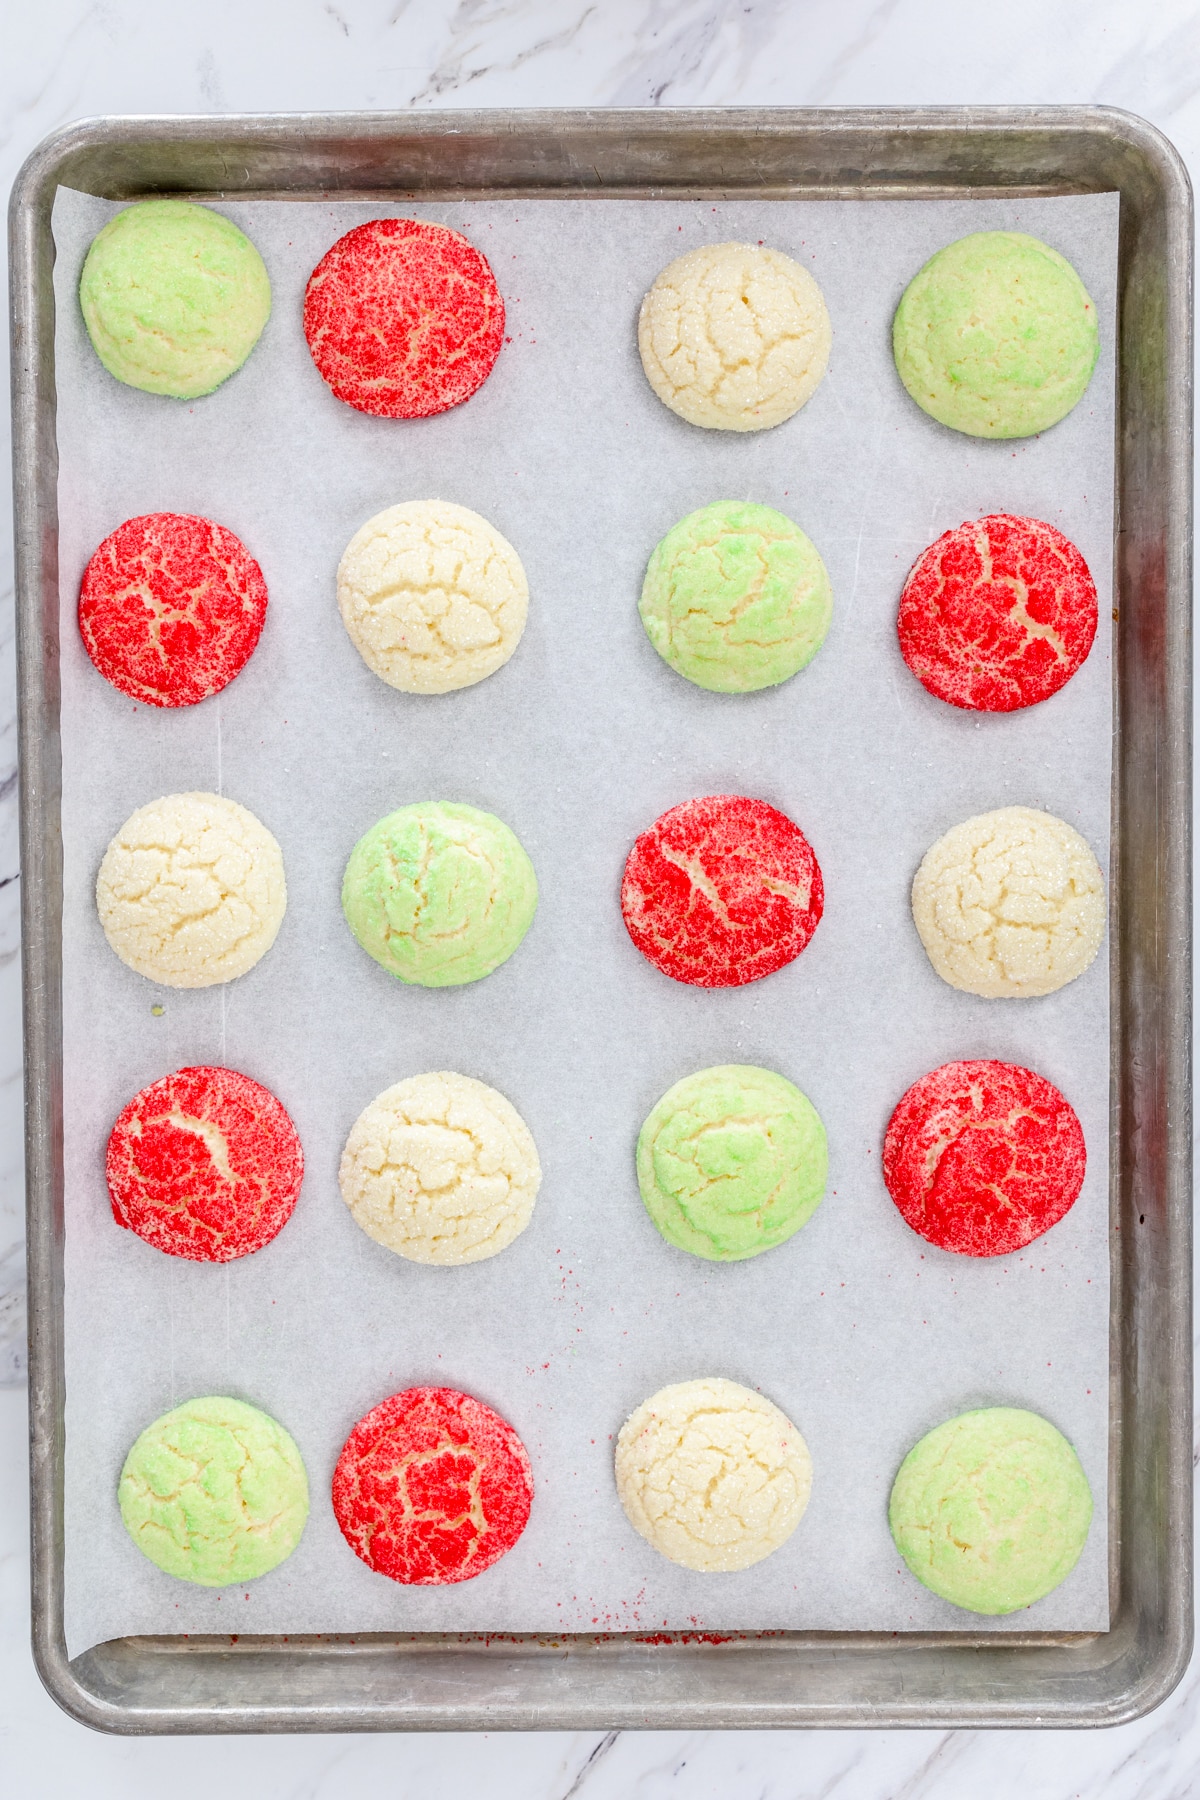 Top view of green, white, and red freshly baked sugar cookies on a tray.